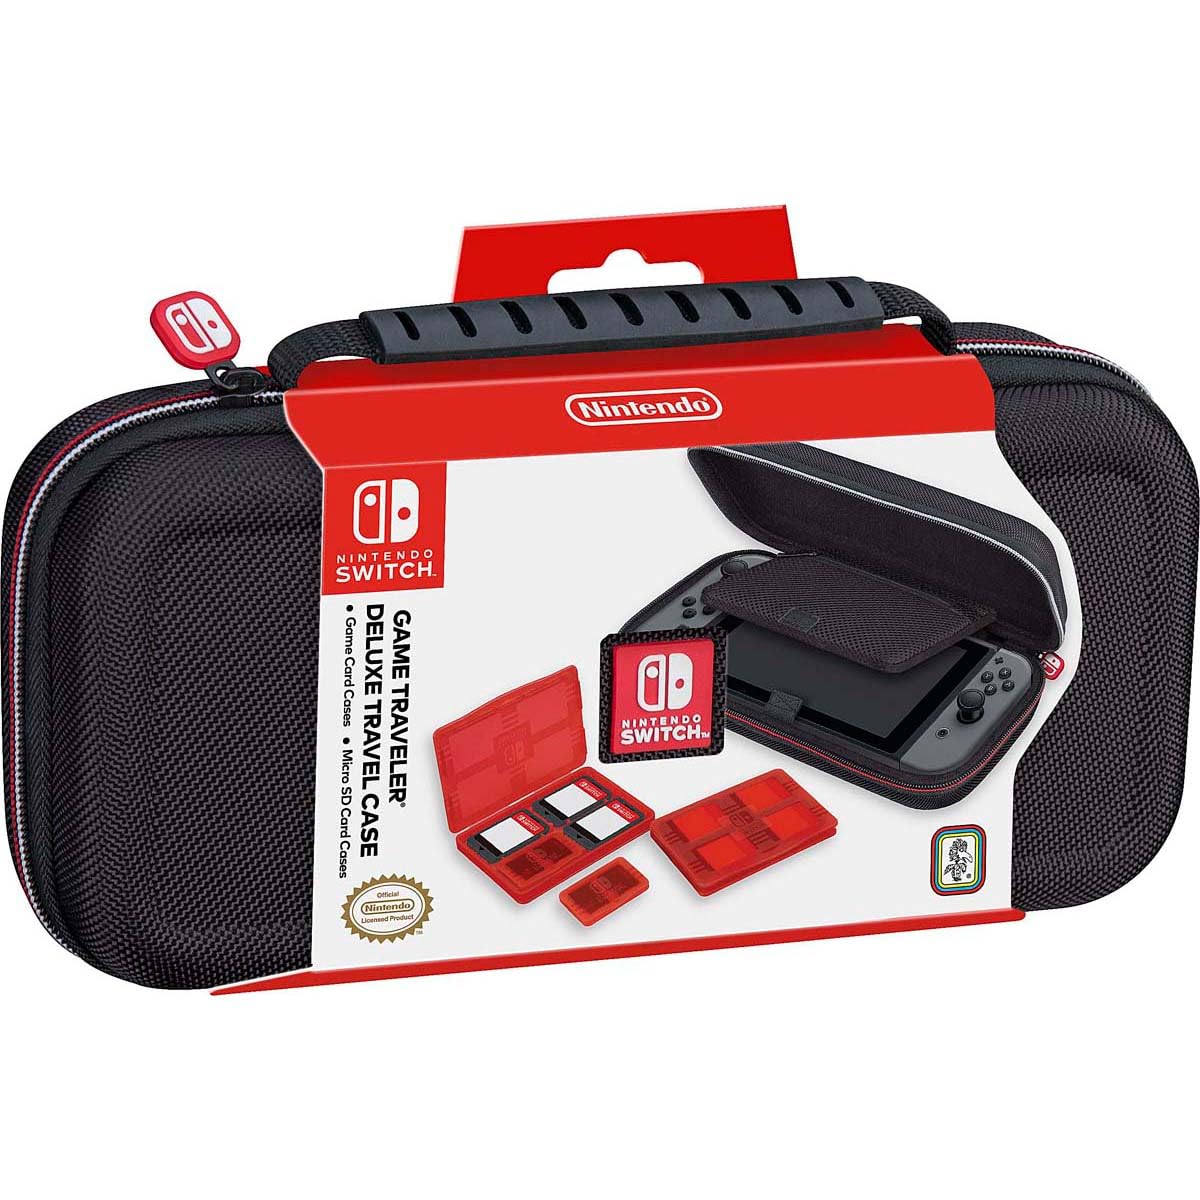 Game Traveler Nintendo Switch Deluxe OLED Case - Also for Switch & Switch Lite, Black Ballistic Nylon, Viewing Stand & Bonus Game Cases, Deluxe Handle, Licensed by Nintendo, #1 Selling Case in USA - amzGamess